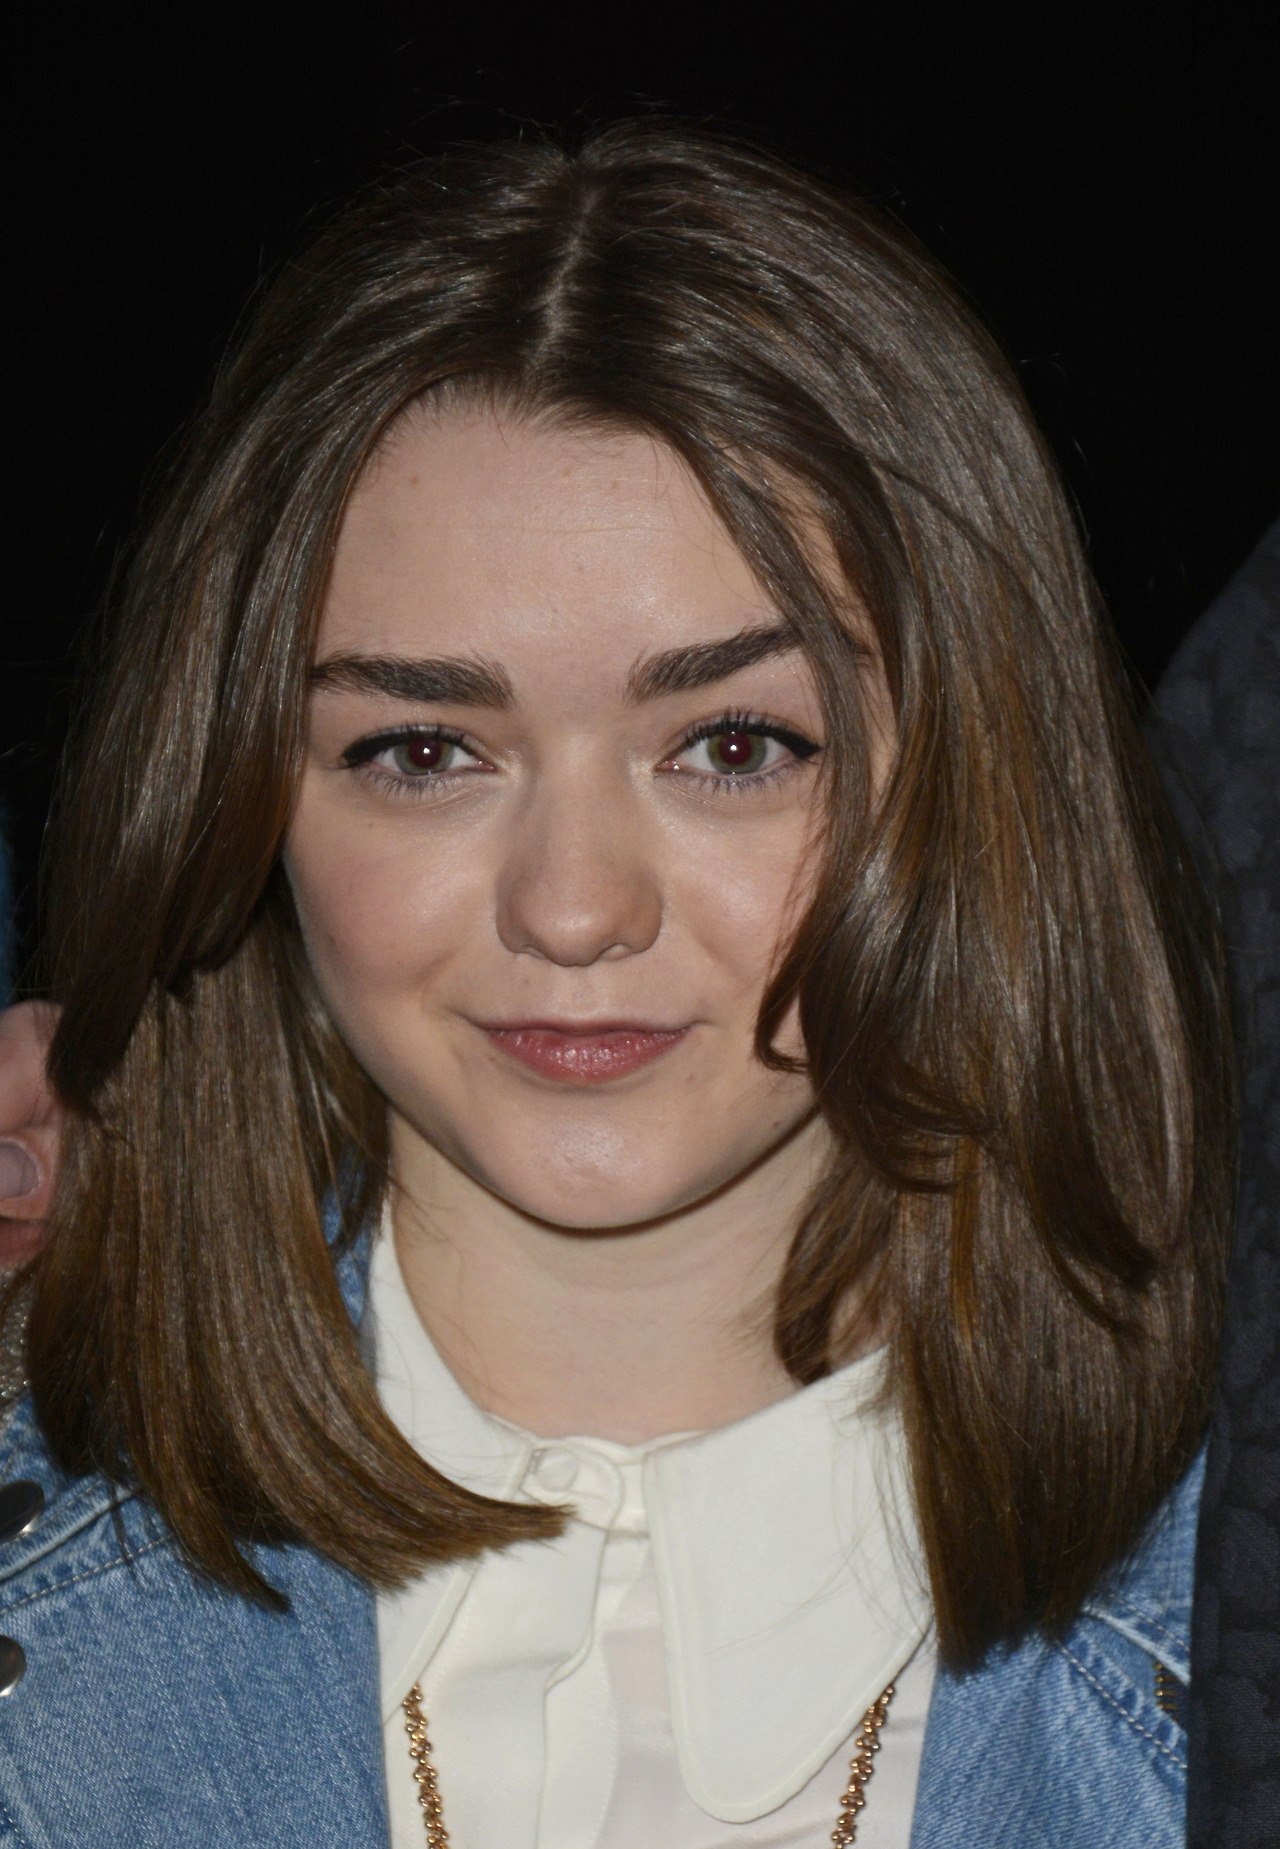 Maisie Williams Images - Management And Leadership